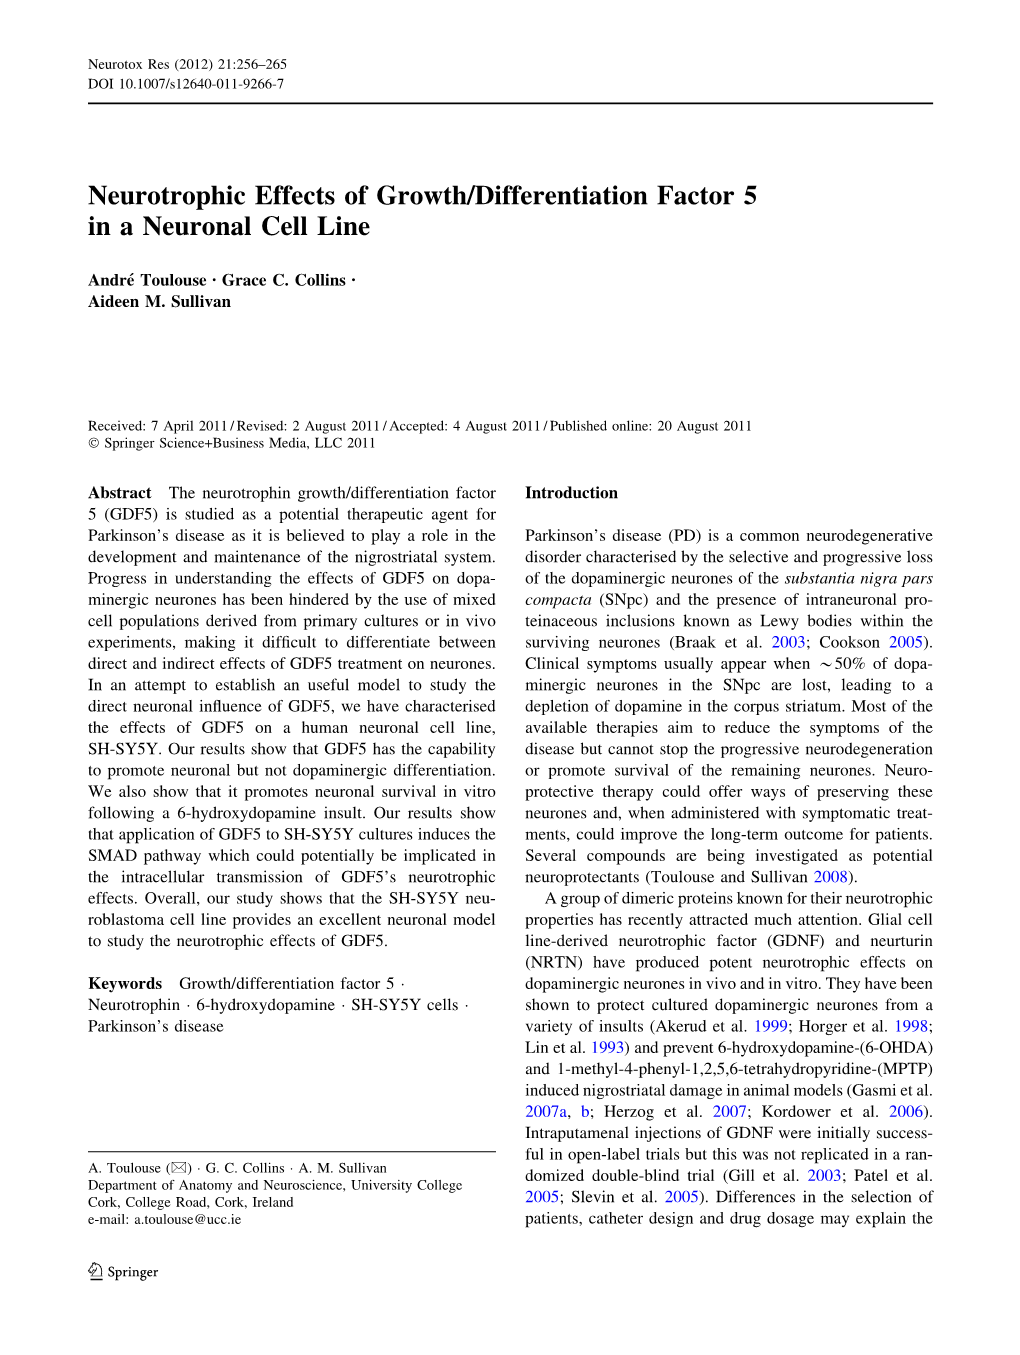 Neurotrophic Effects of Growth/Differentiation Factor 5 in a Neuronal Cell Line